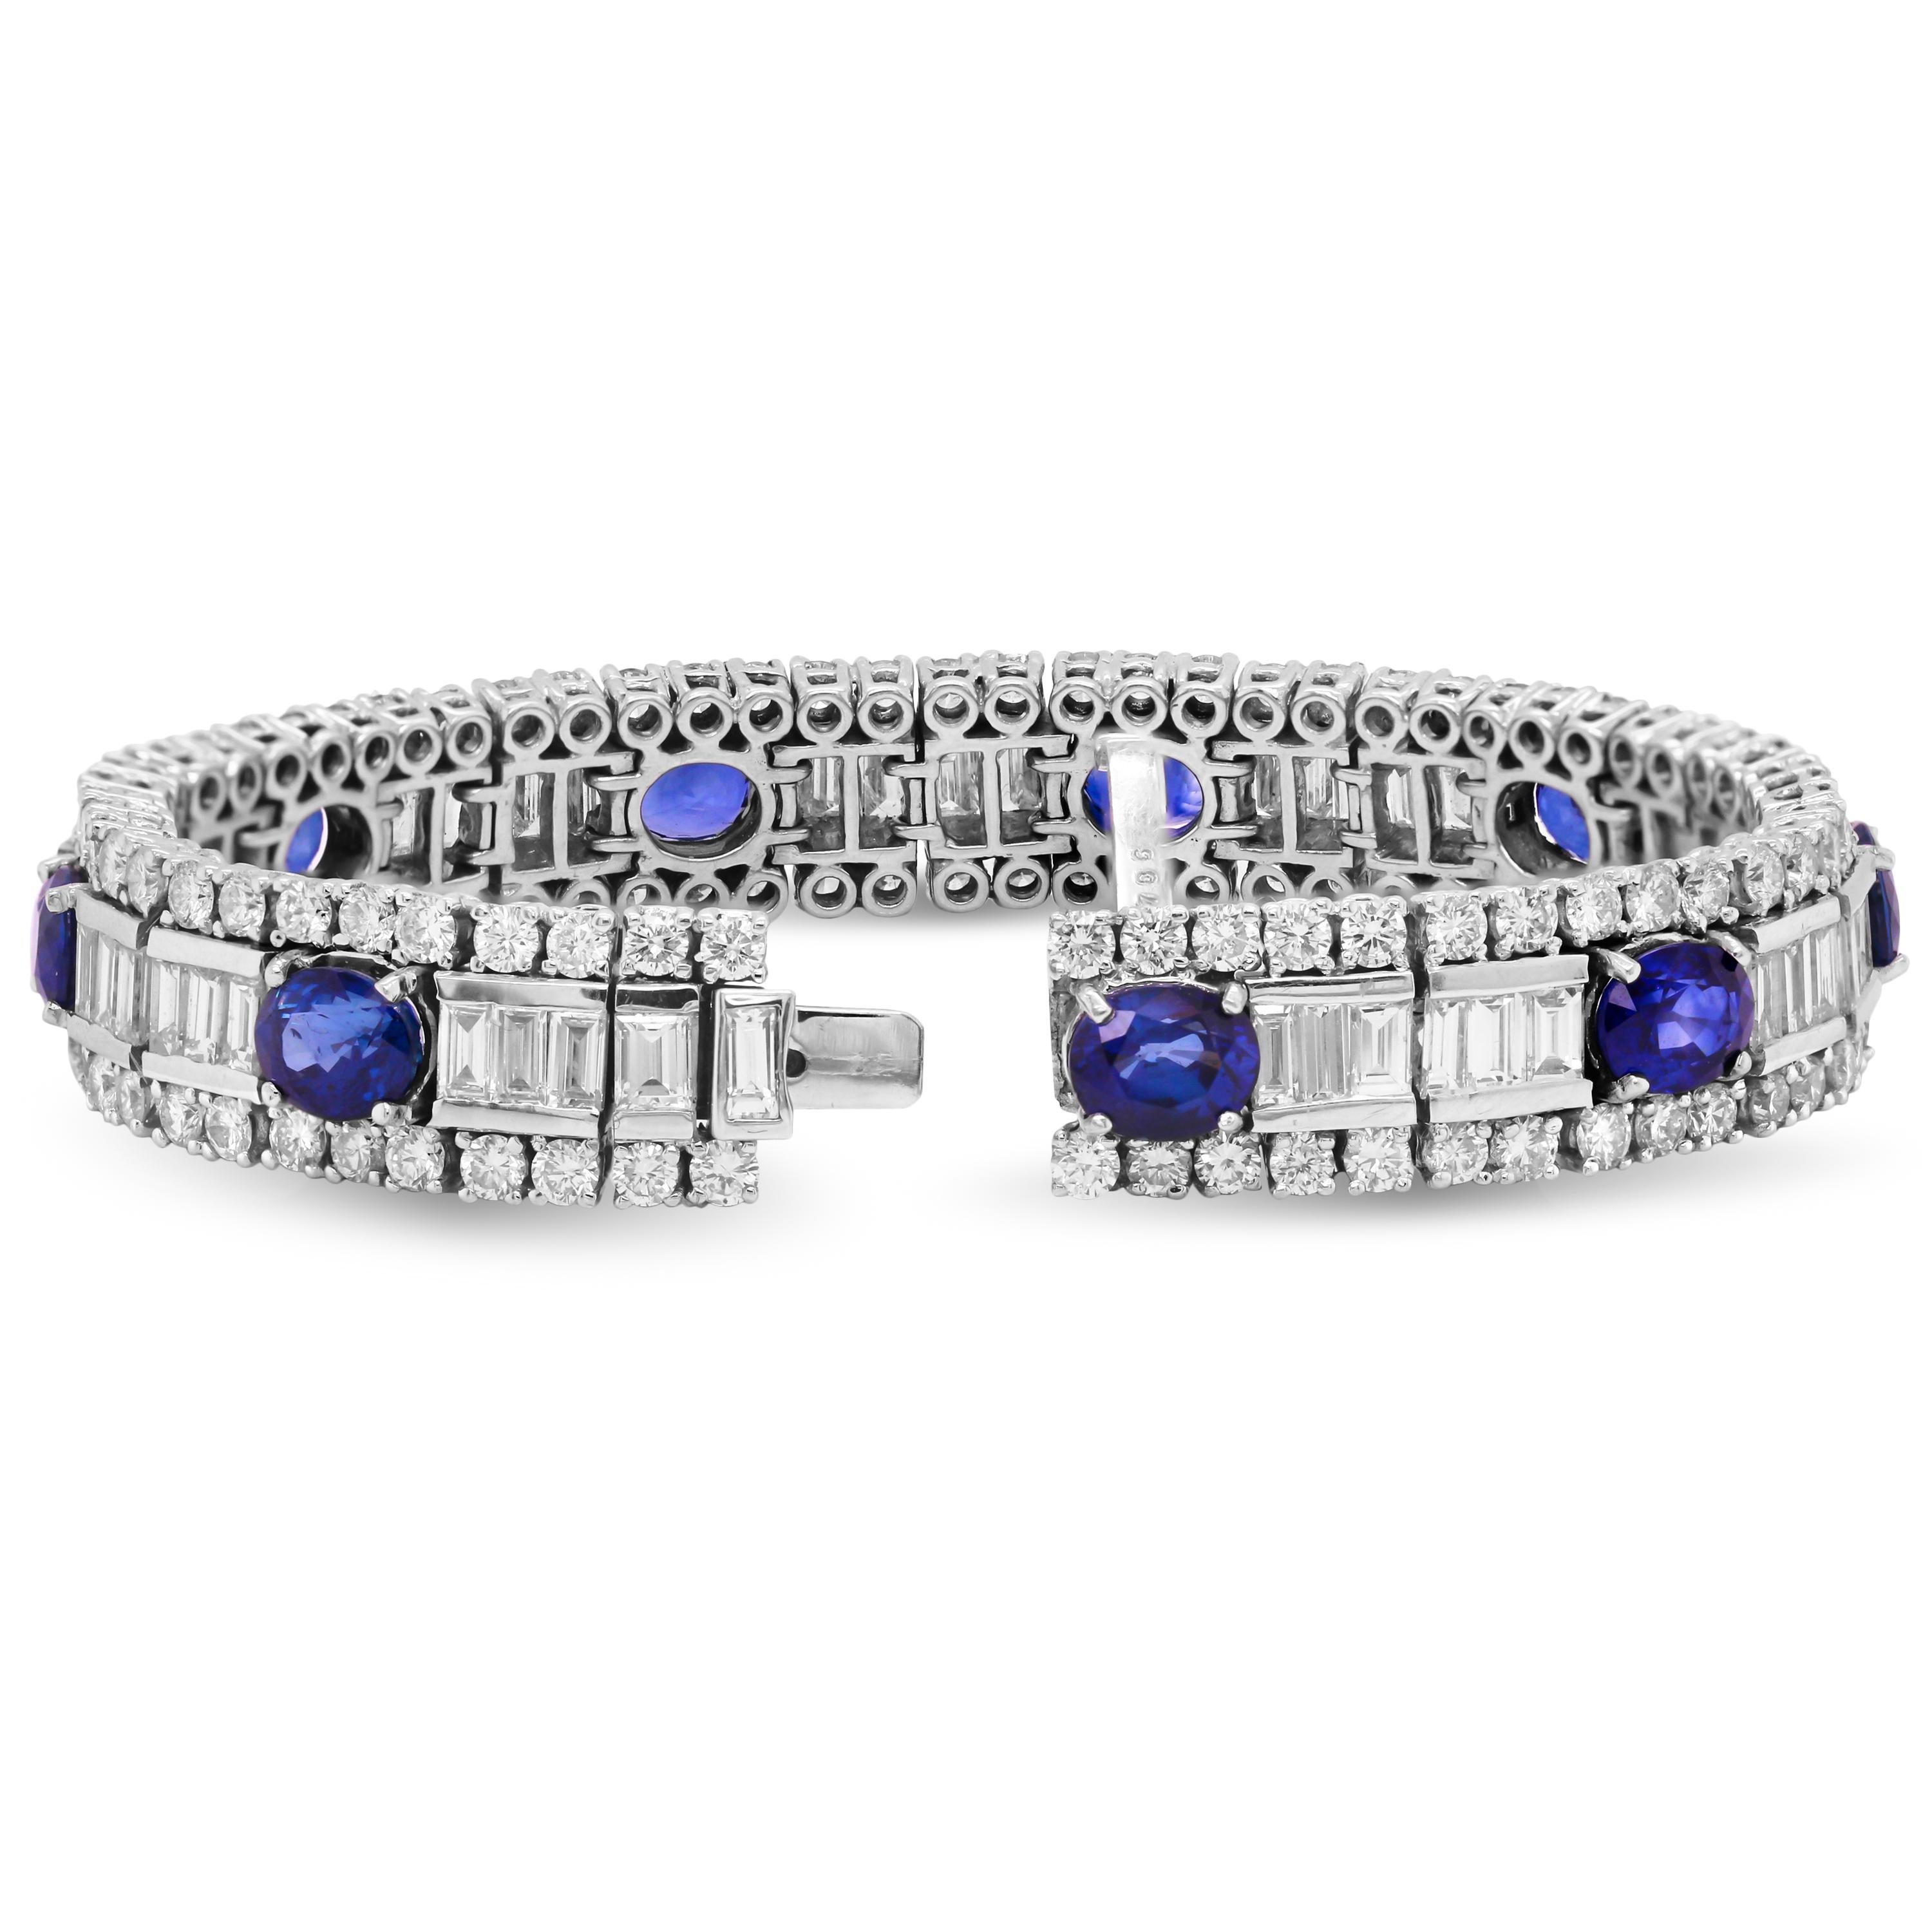 18K White Gold Tennis Bracelet with Baguette and Round Diamonds and Oval Blue Sapphires

This stunning bracelet features eight oval blue sapphires with baguette and round diamonds all throughout. The diamond and sapphire weights are hallmarked near